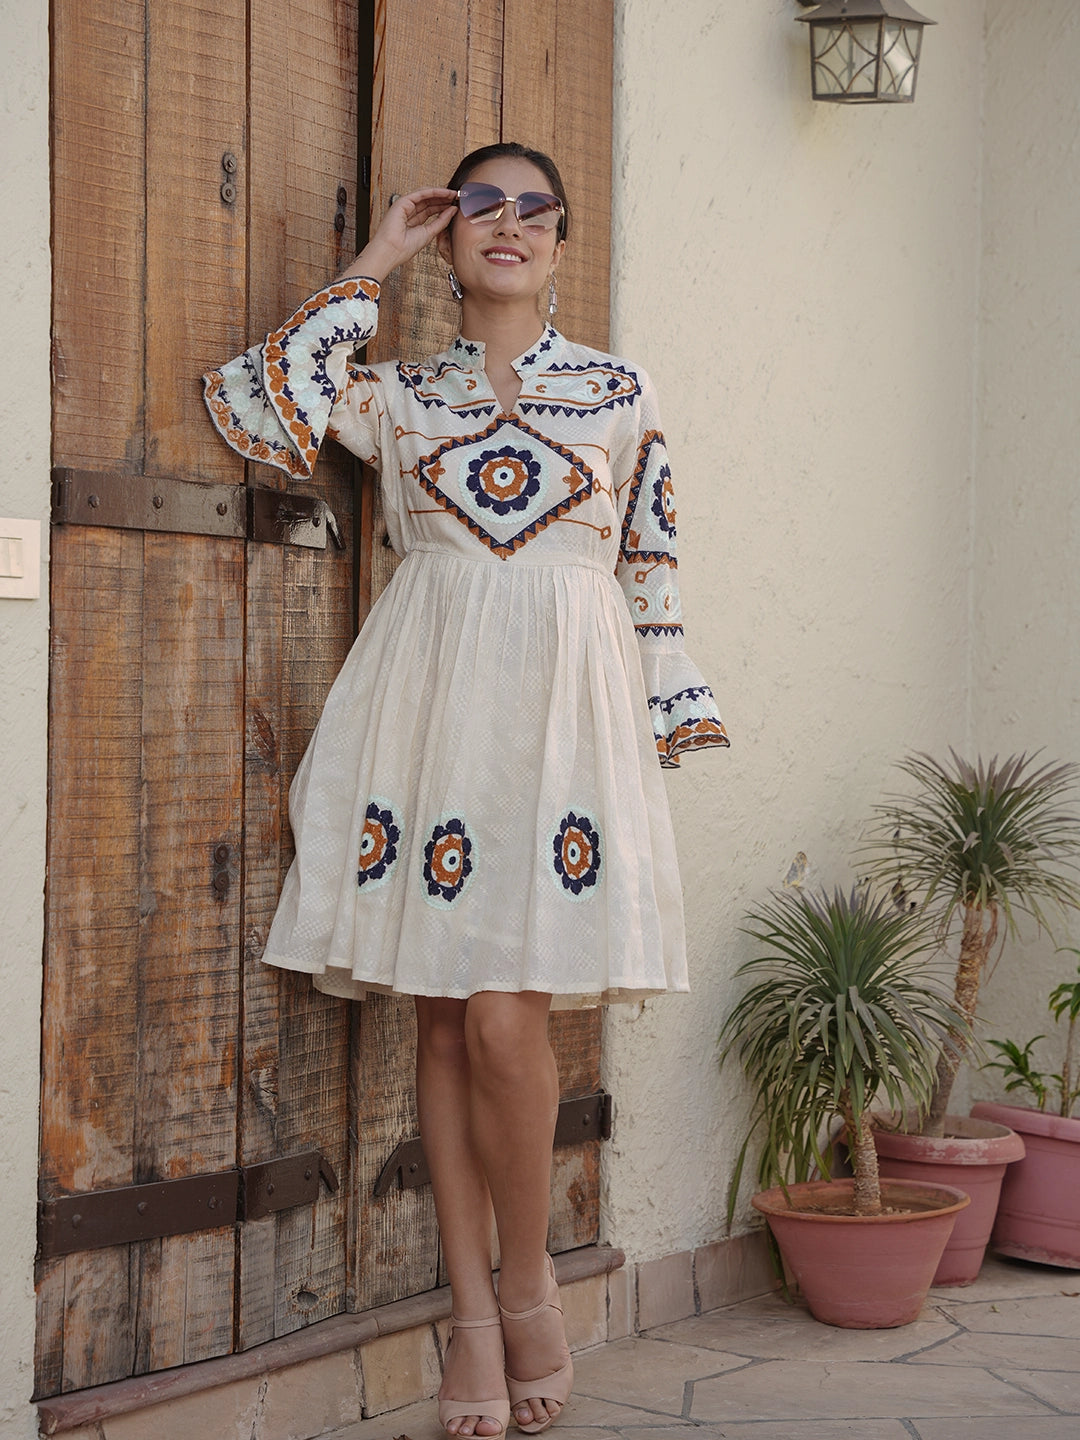 THE STUNNING EMBROIDERY SHORT DRESS